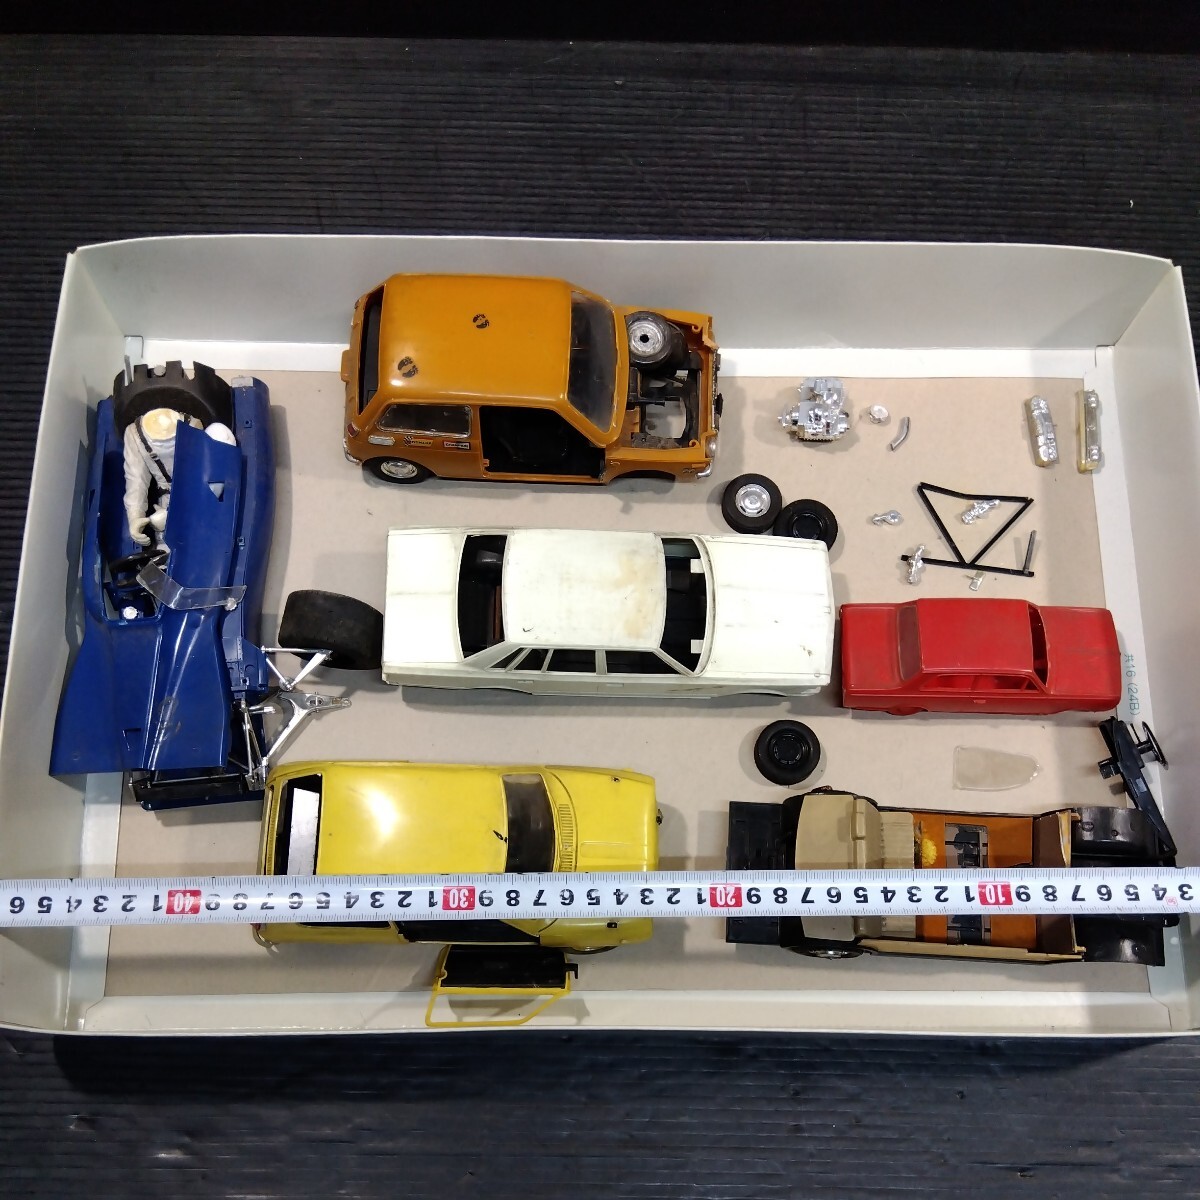  present condition goods collection settled automobile plastic model parts parts taking . also passenger vehicle Formula F-1 racing car together Showa Retro Kyosho, Tamiya series toy 